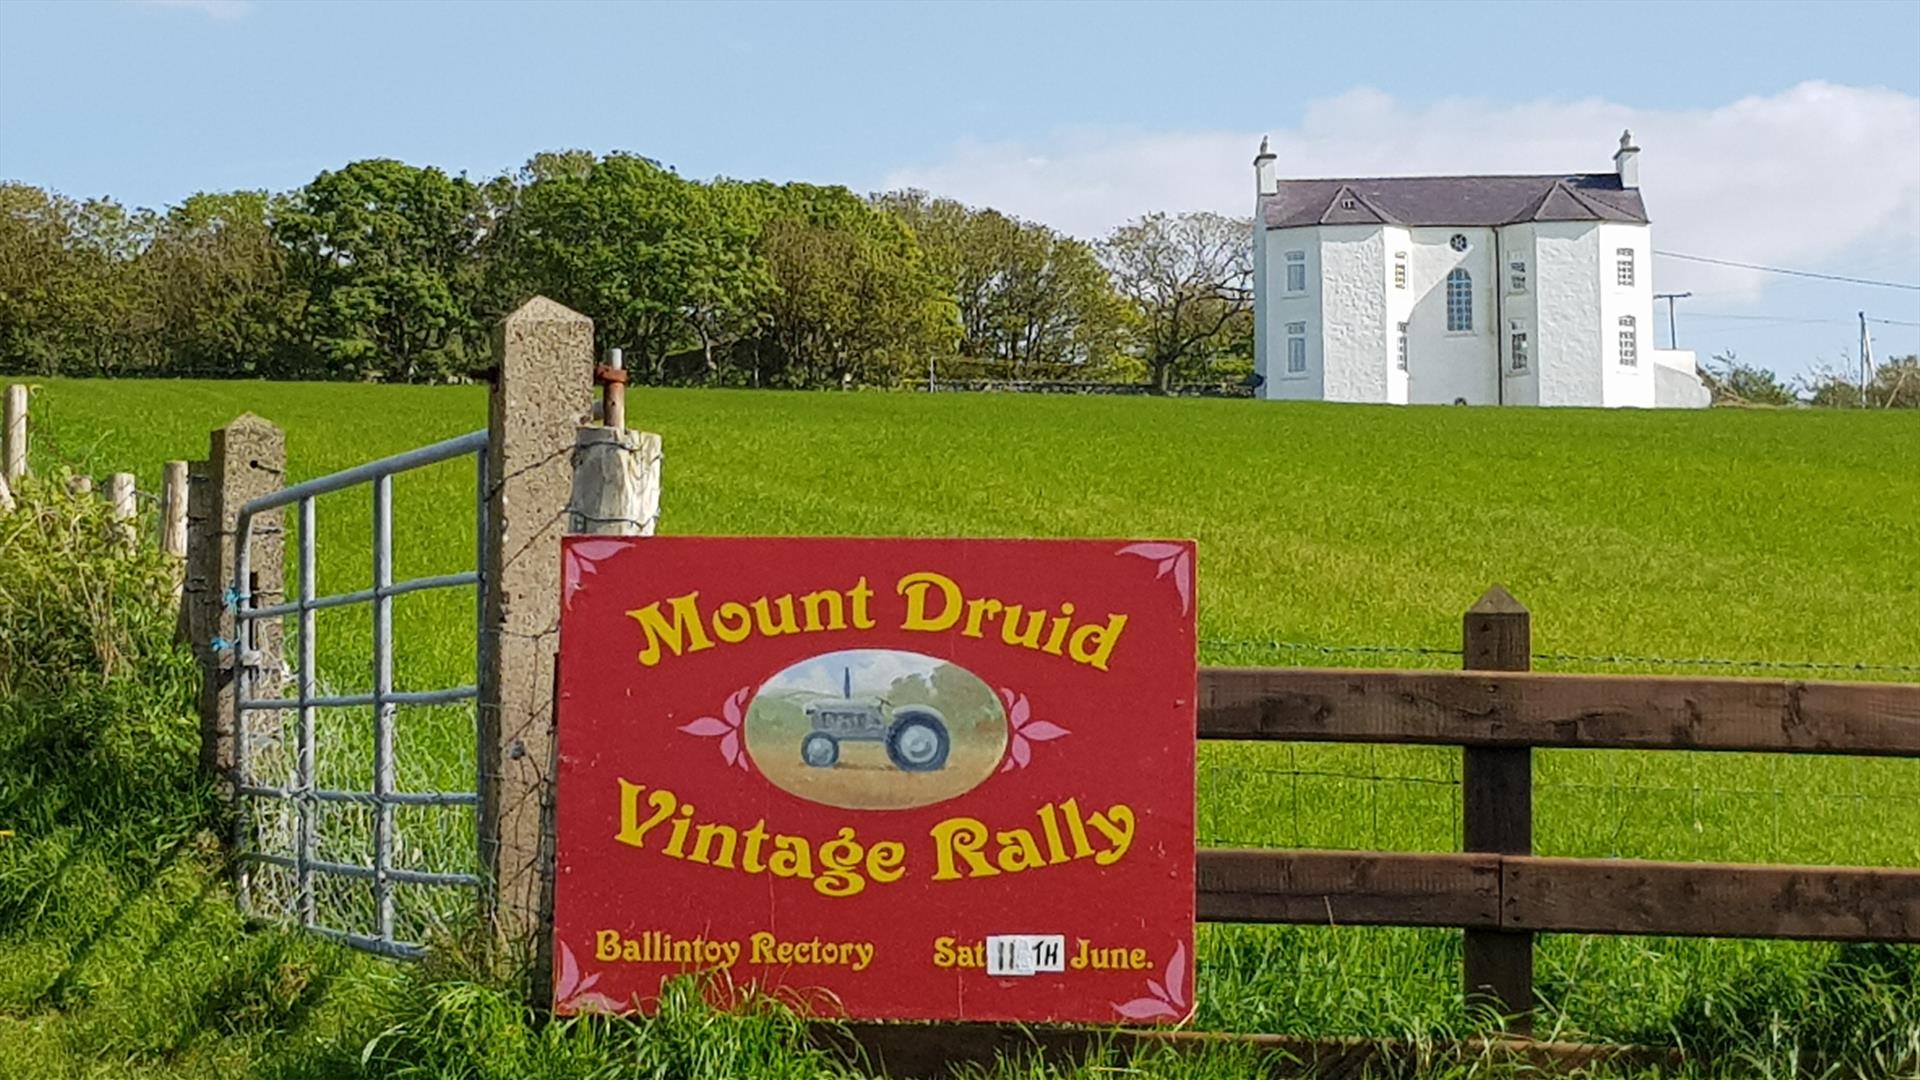 Image showing Ballintoy Rectory in the background with green fields in the foreground.  There is a sign on a fence advertising the Mount Druid Vintage